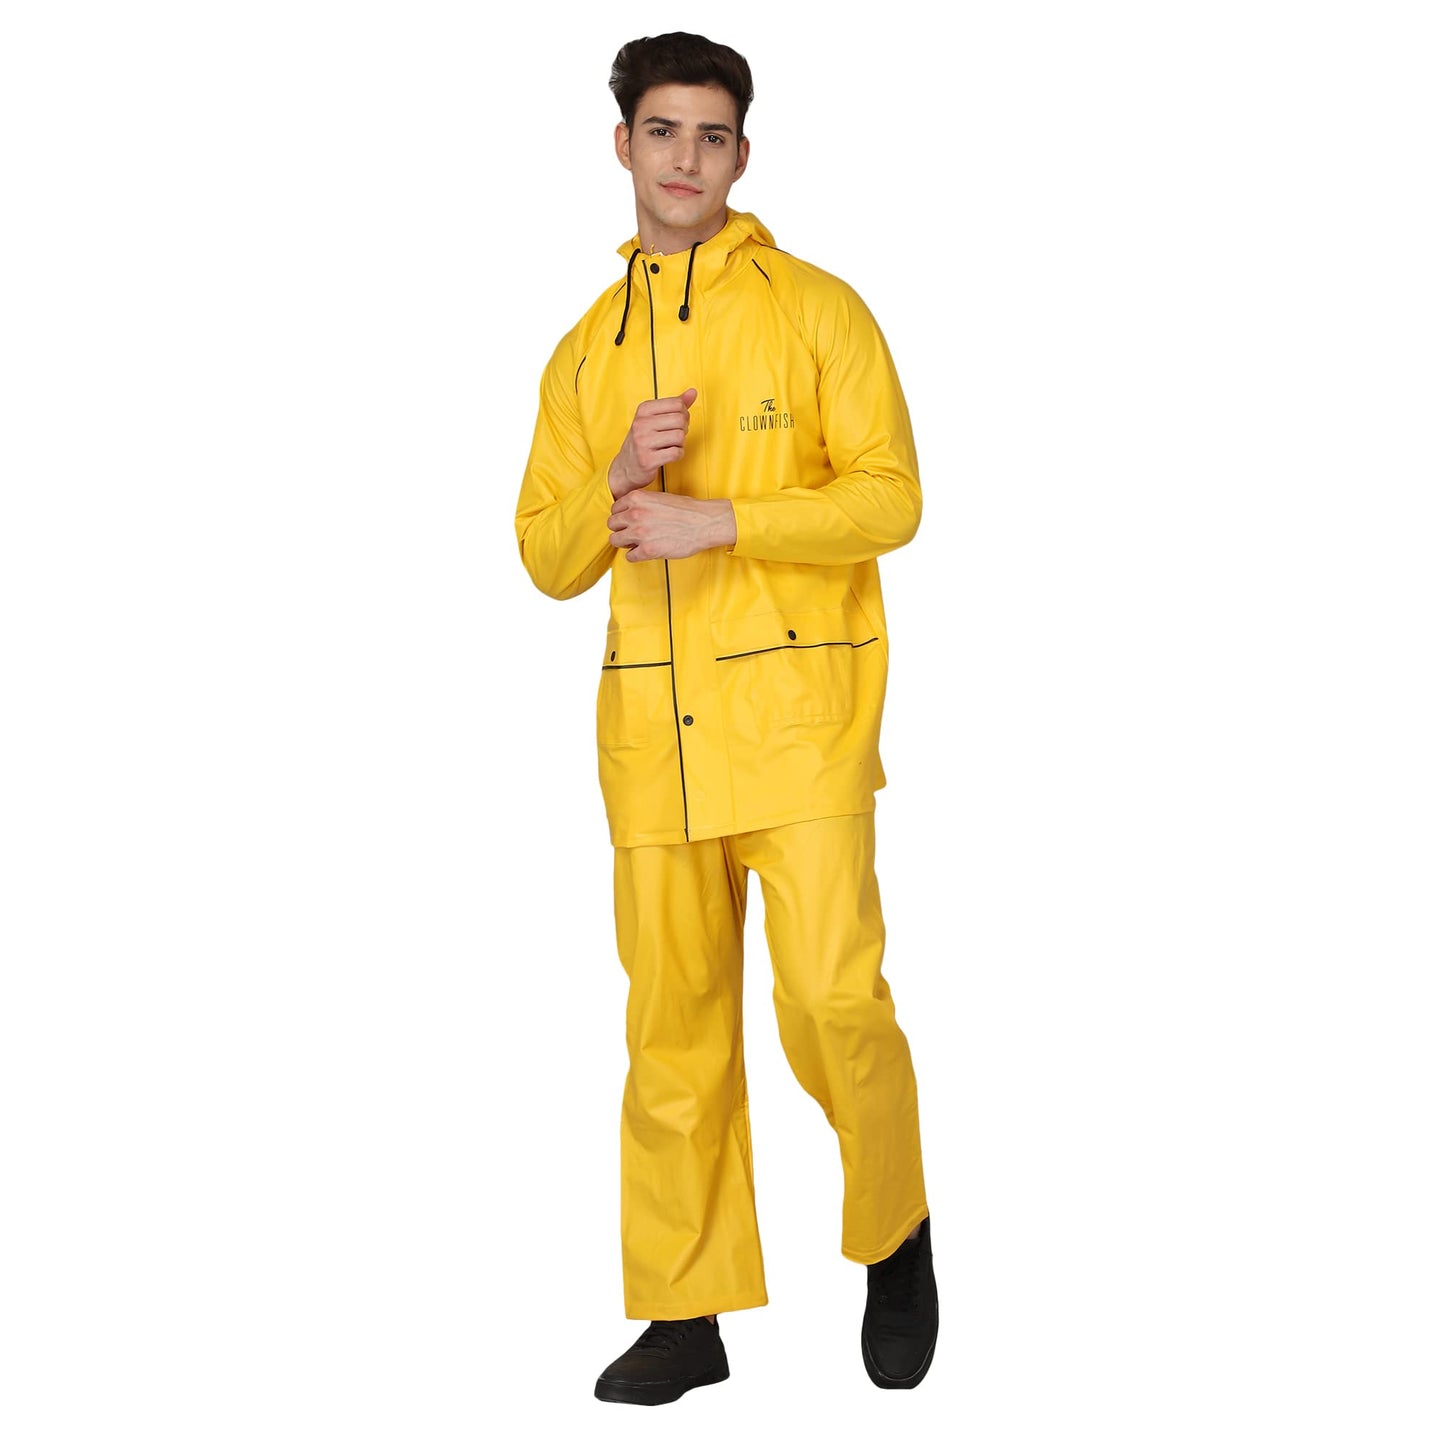 THE CLOWNFISH Azure Series Men's PVC Solid Waterproof Rain coat with Hood Set of Top and Bottom (Sea Green, X-Large)